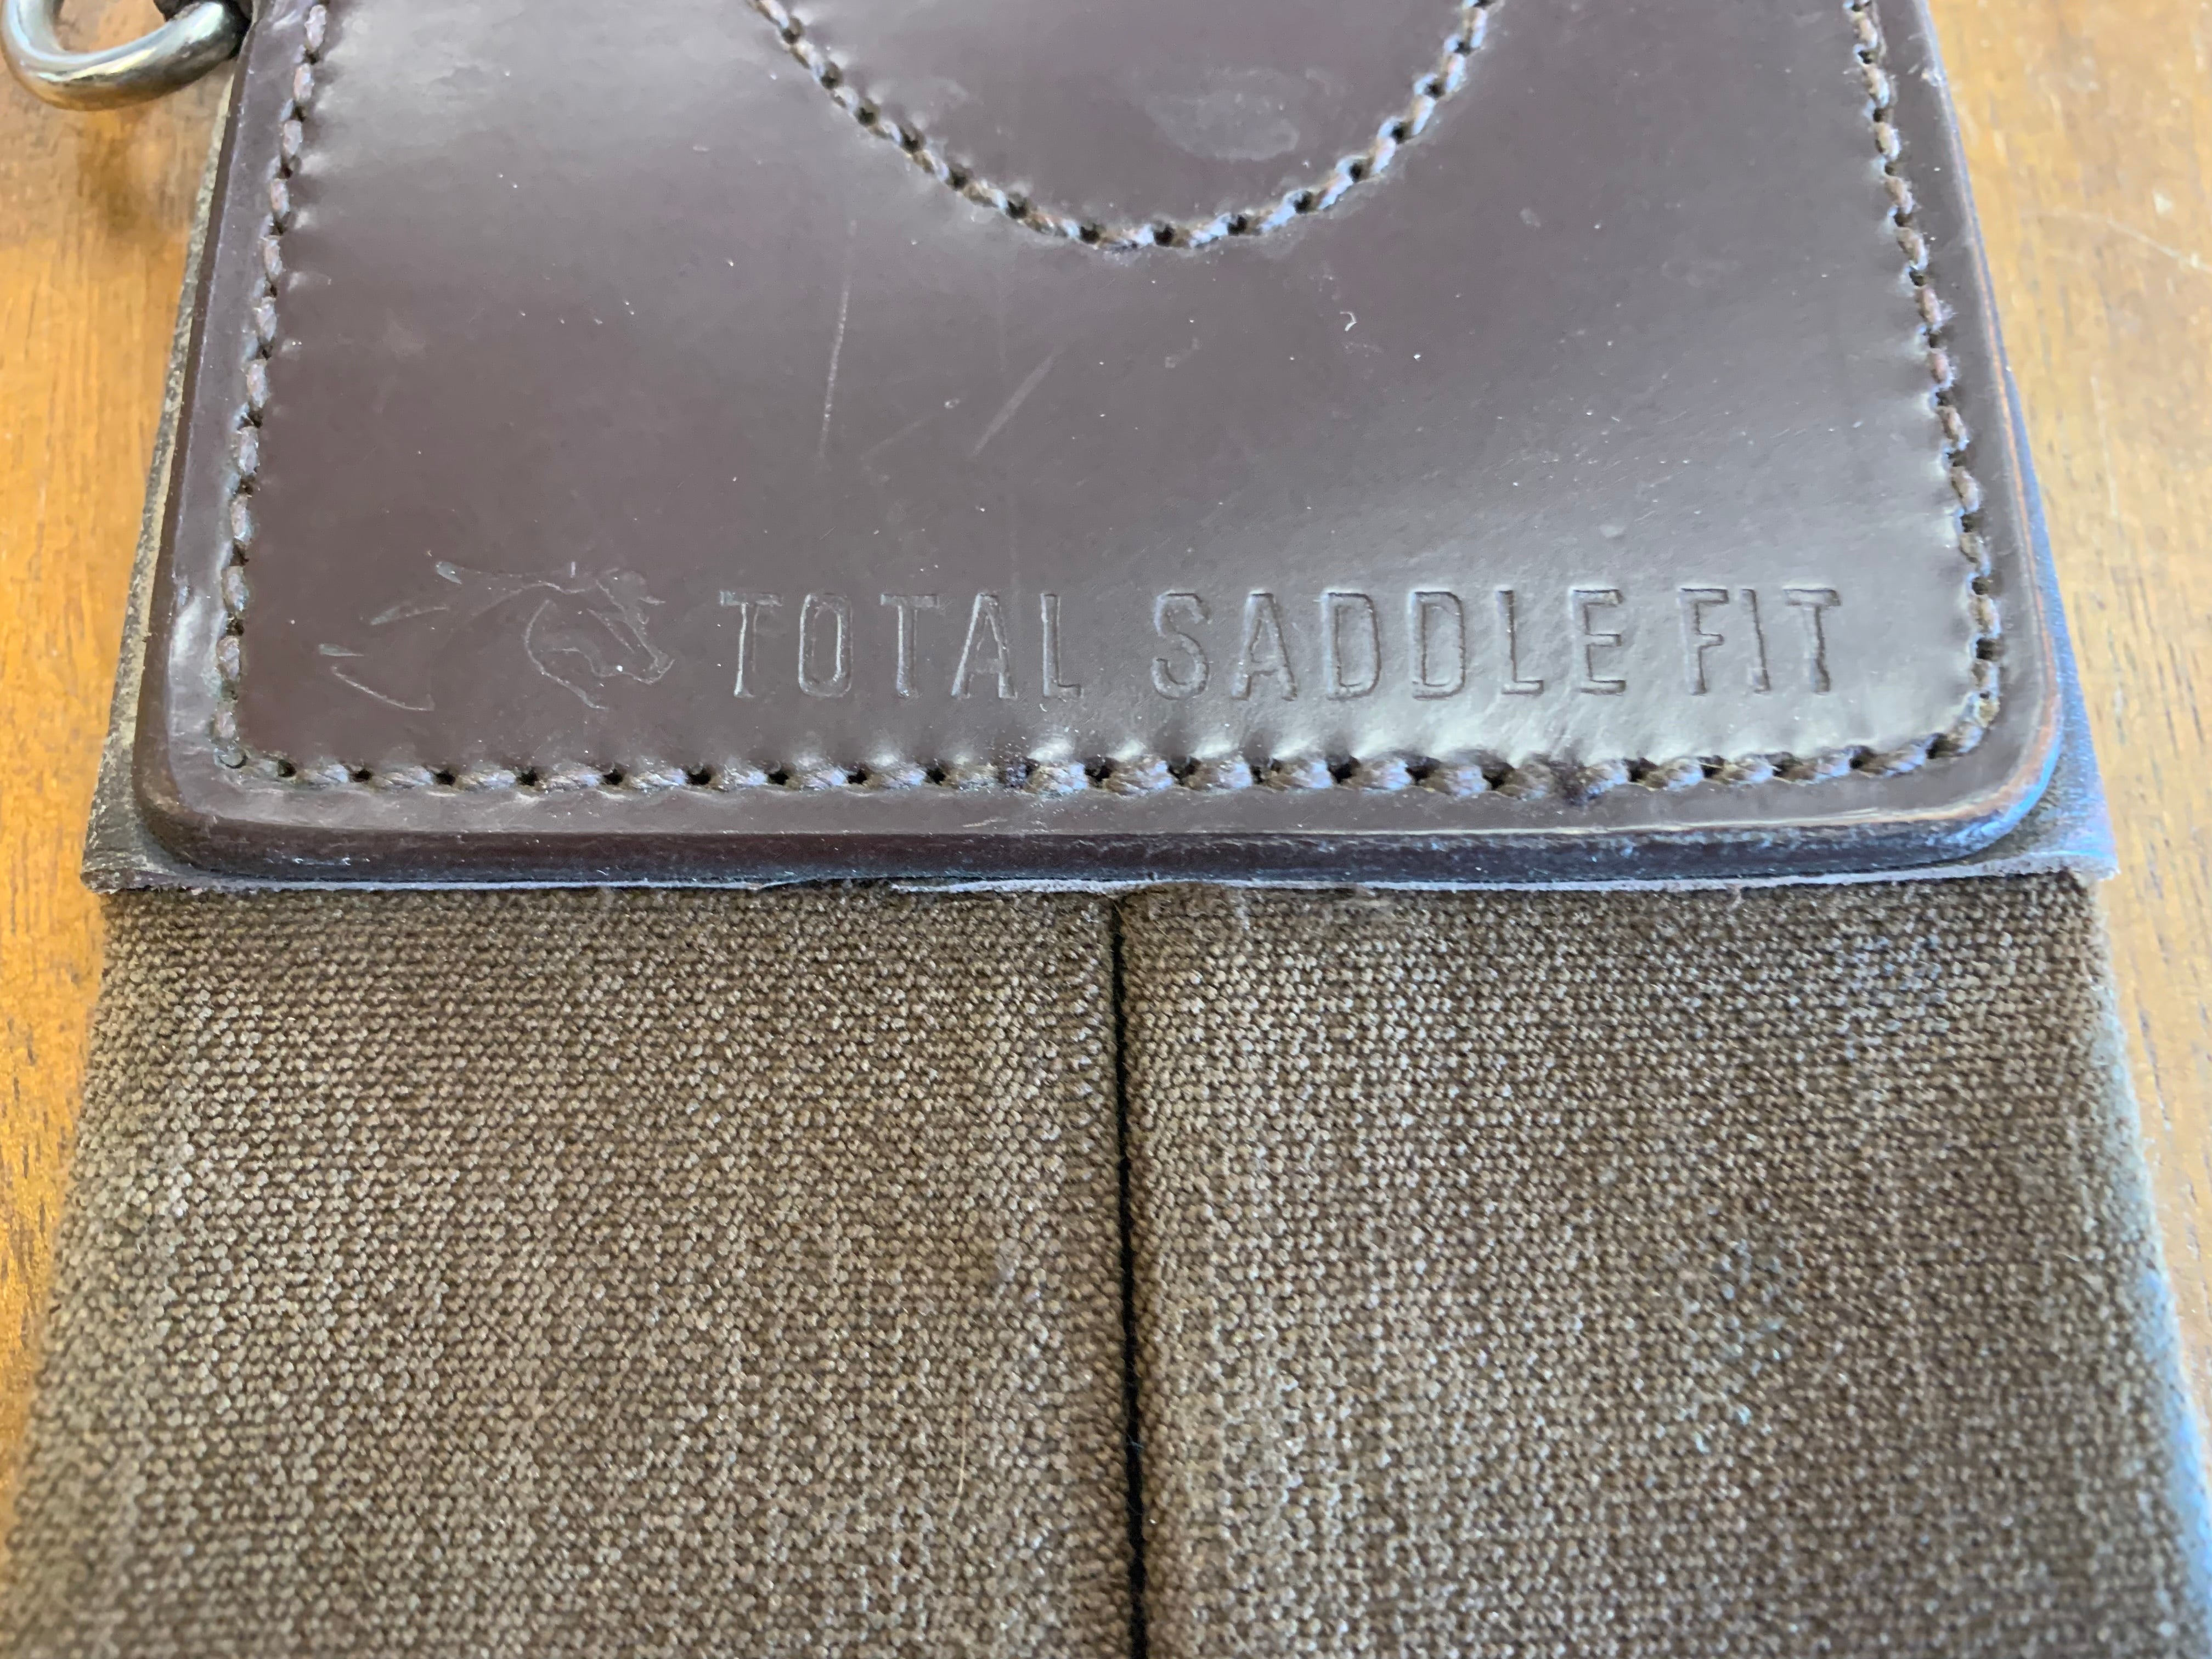 PRE-LOVED TOTAL SADDLE FIT SHOULD RELIEF GIRTH